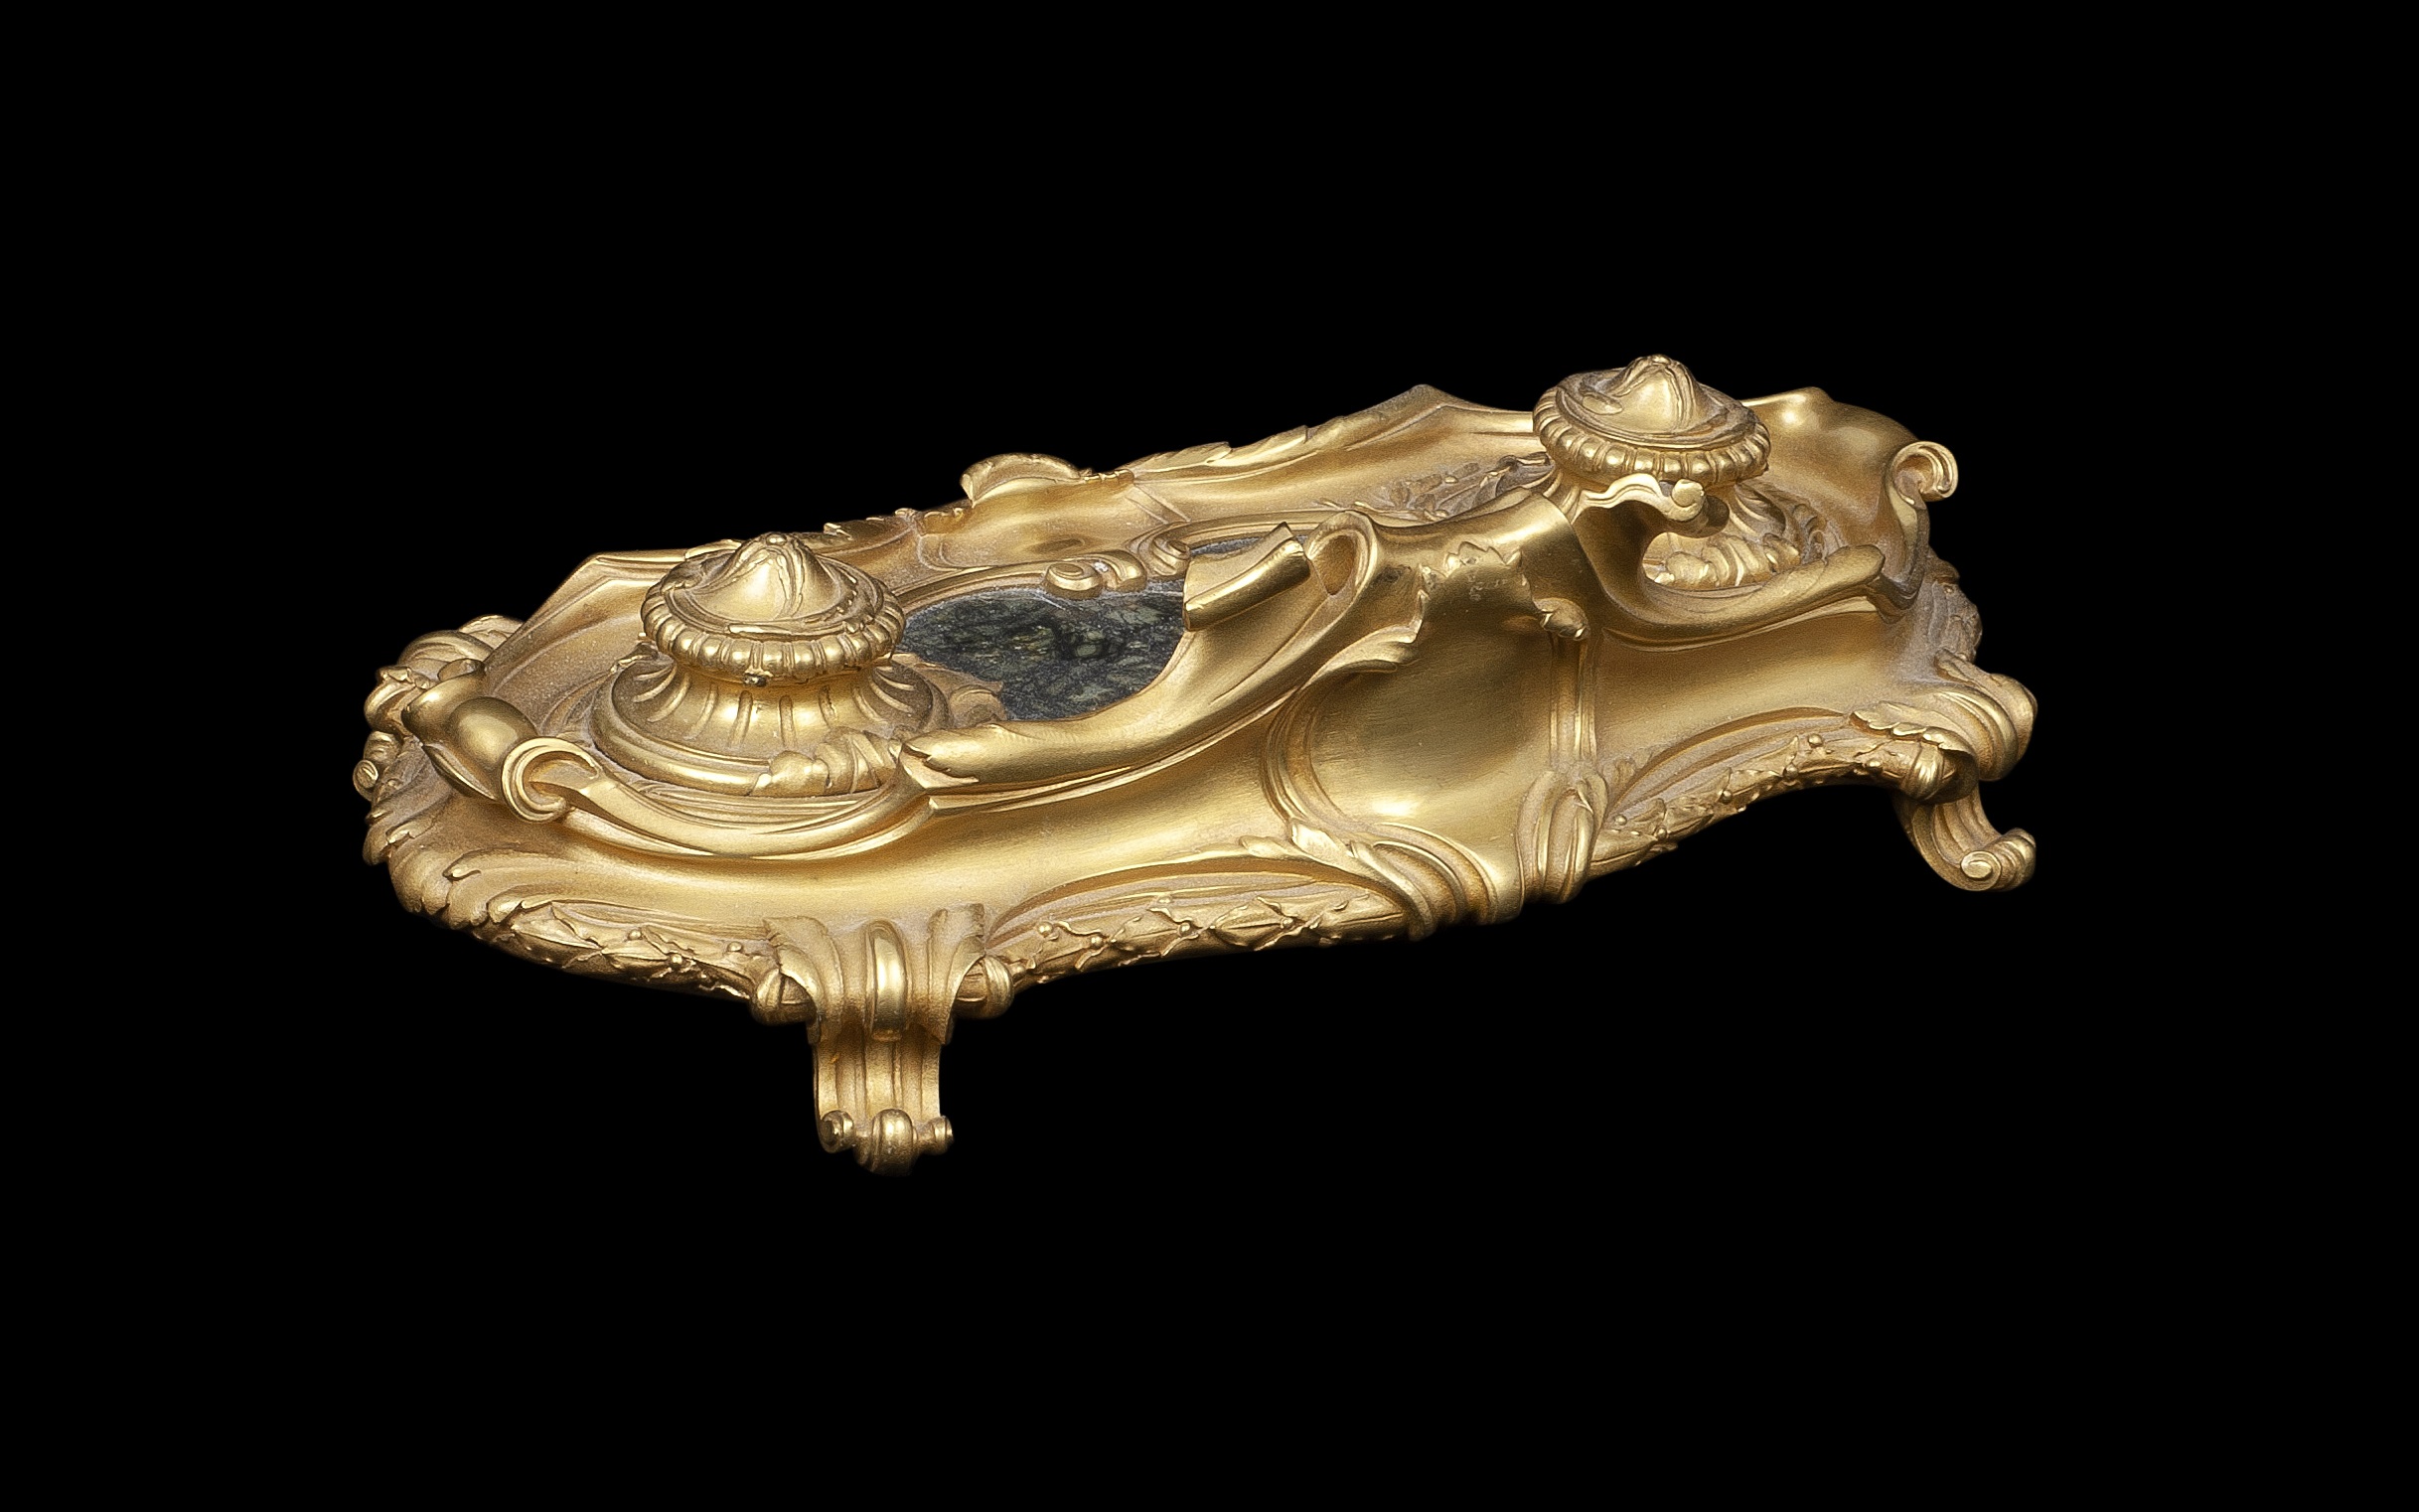 A LATE 19TH CENTURY FRENCH GILT BRONZE LOUIS XV STYLE ENCRIER - Image 3 of 3